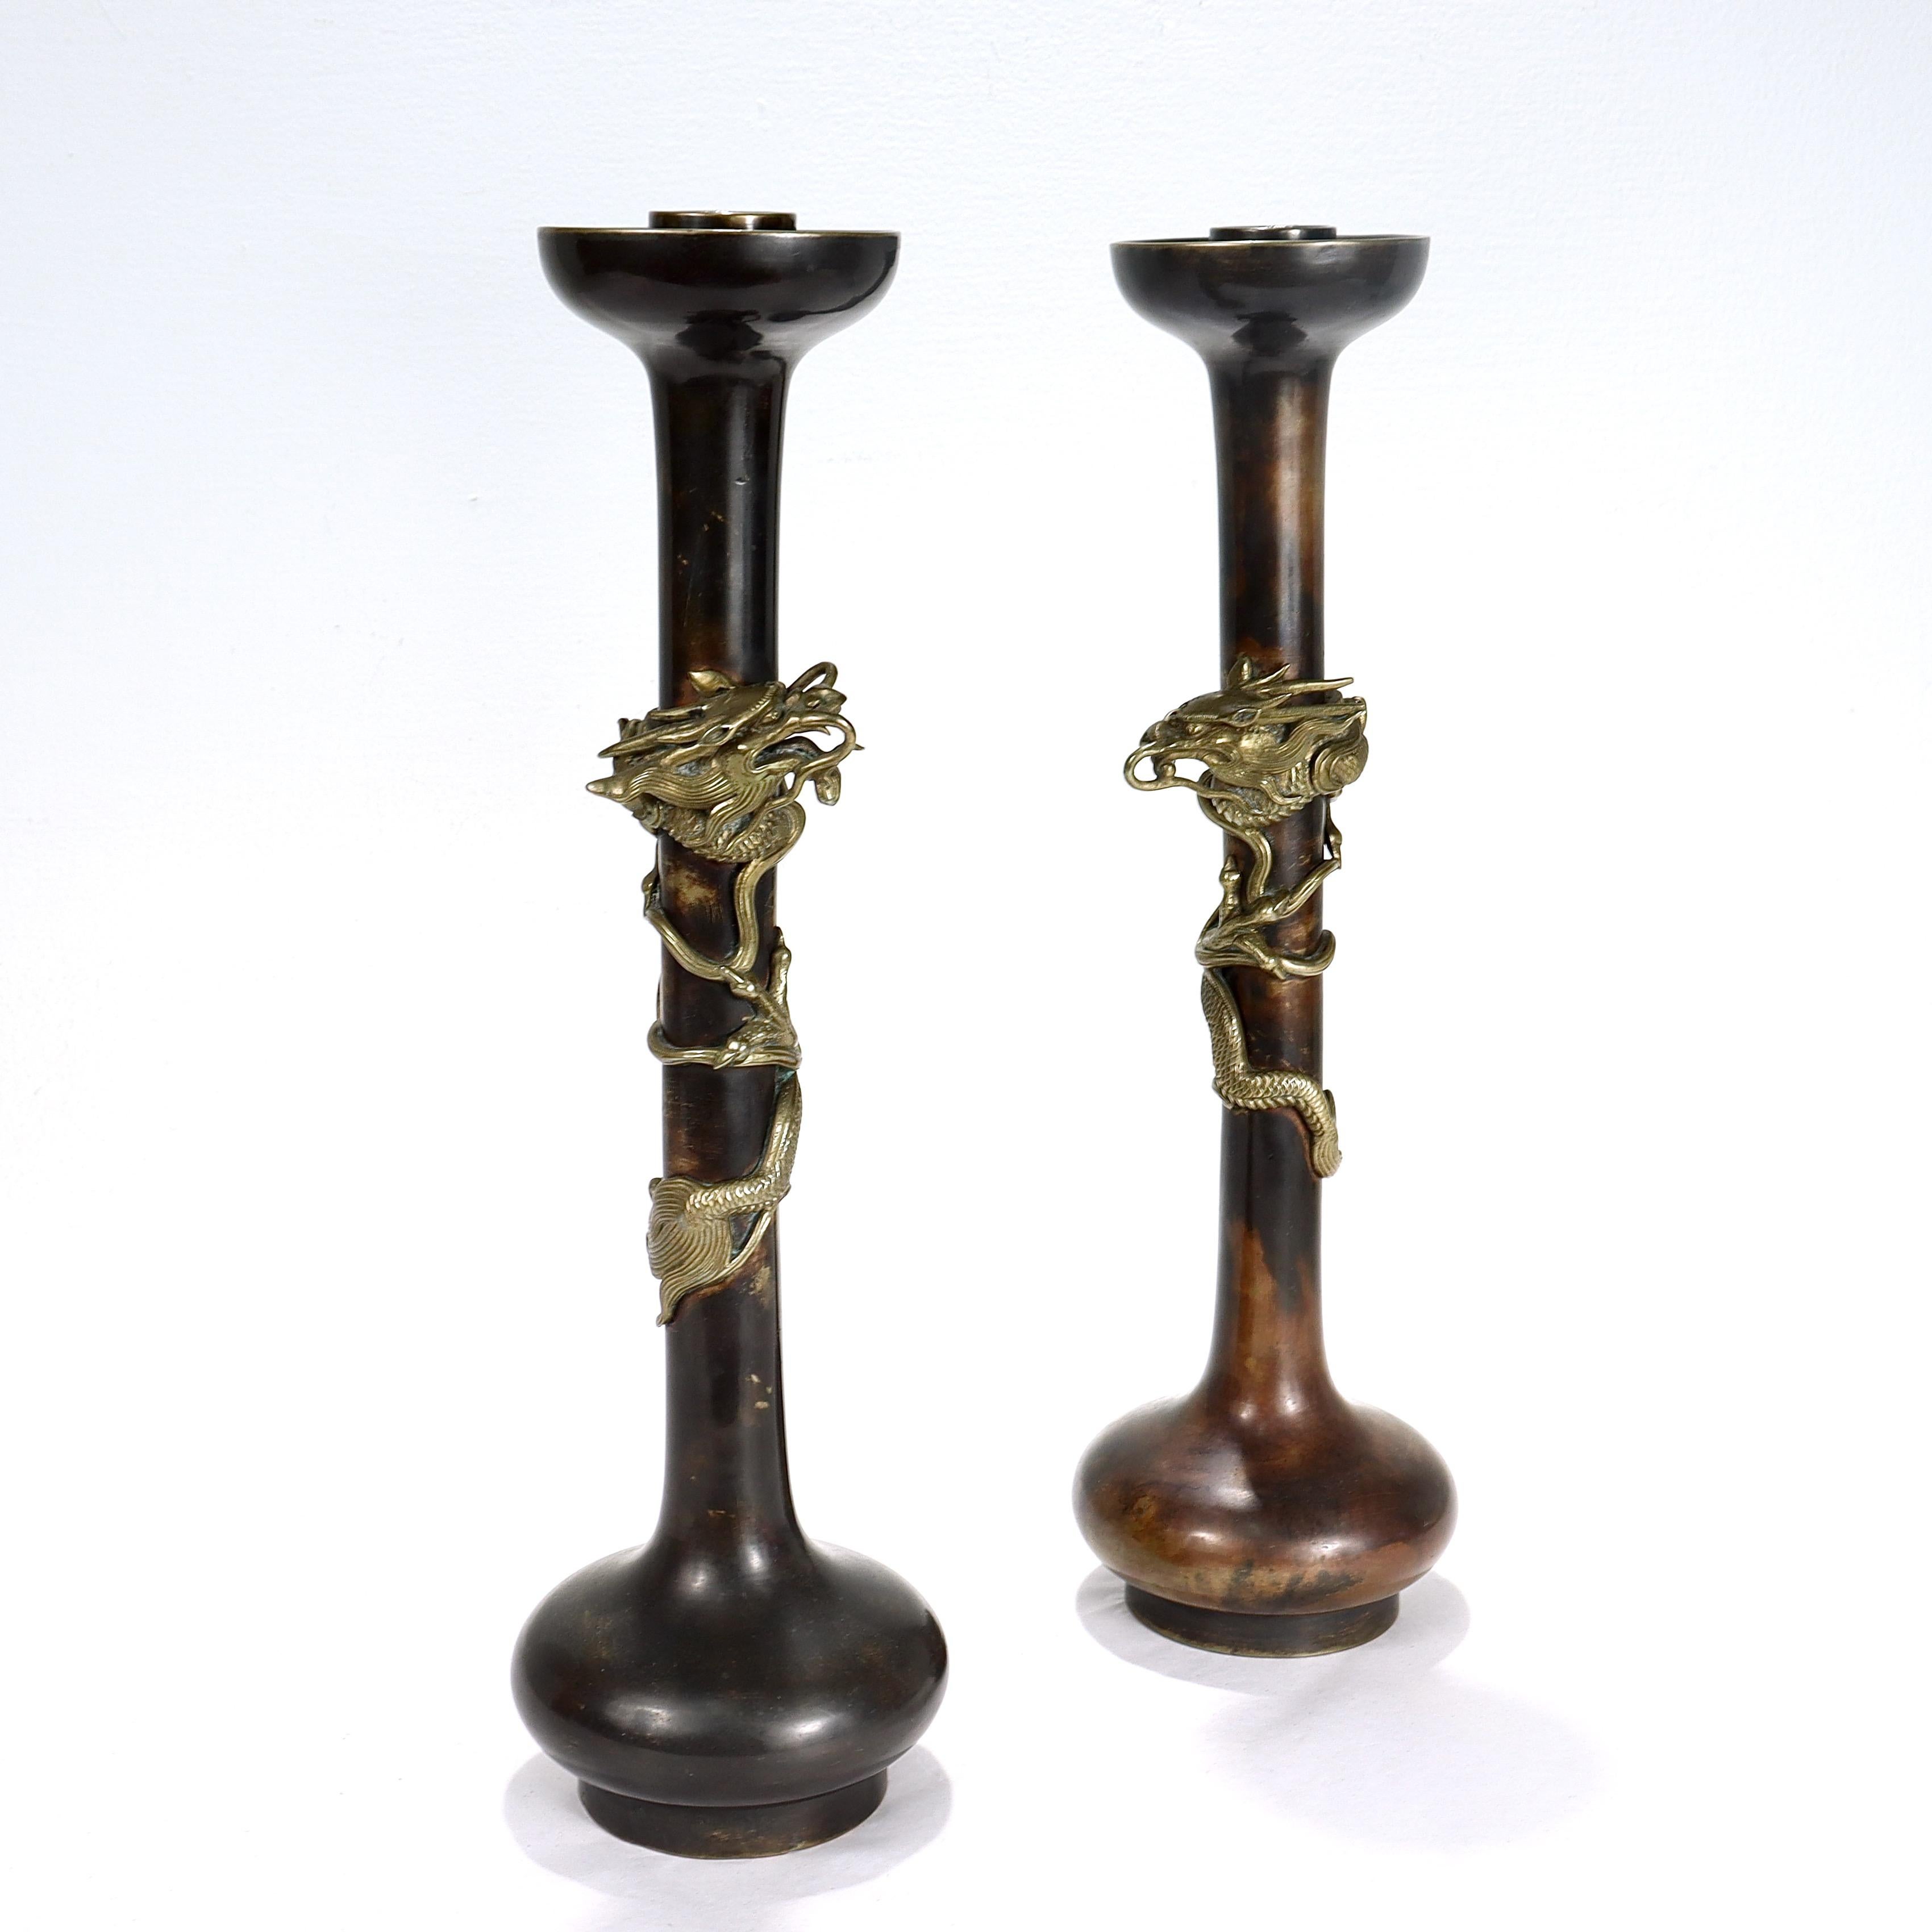 A fine pair of antique Japanese bronze candlesticks.

Each decorated with an applied, coiled dragon to its elongated thin neck below an everted lip and candle cup and above a suppressed ball foot and base. Each dragon with highly detailed hammered